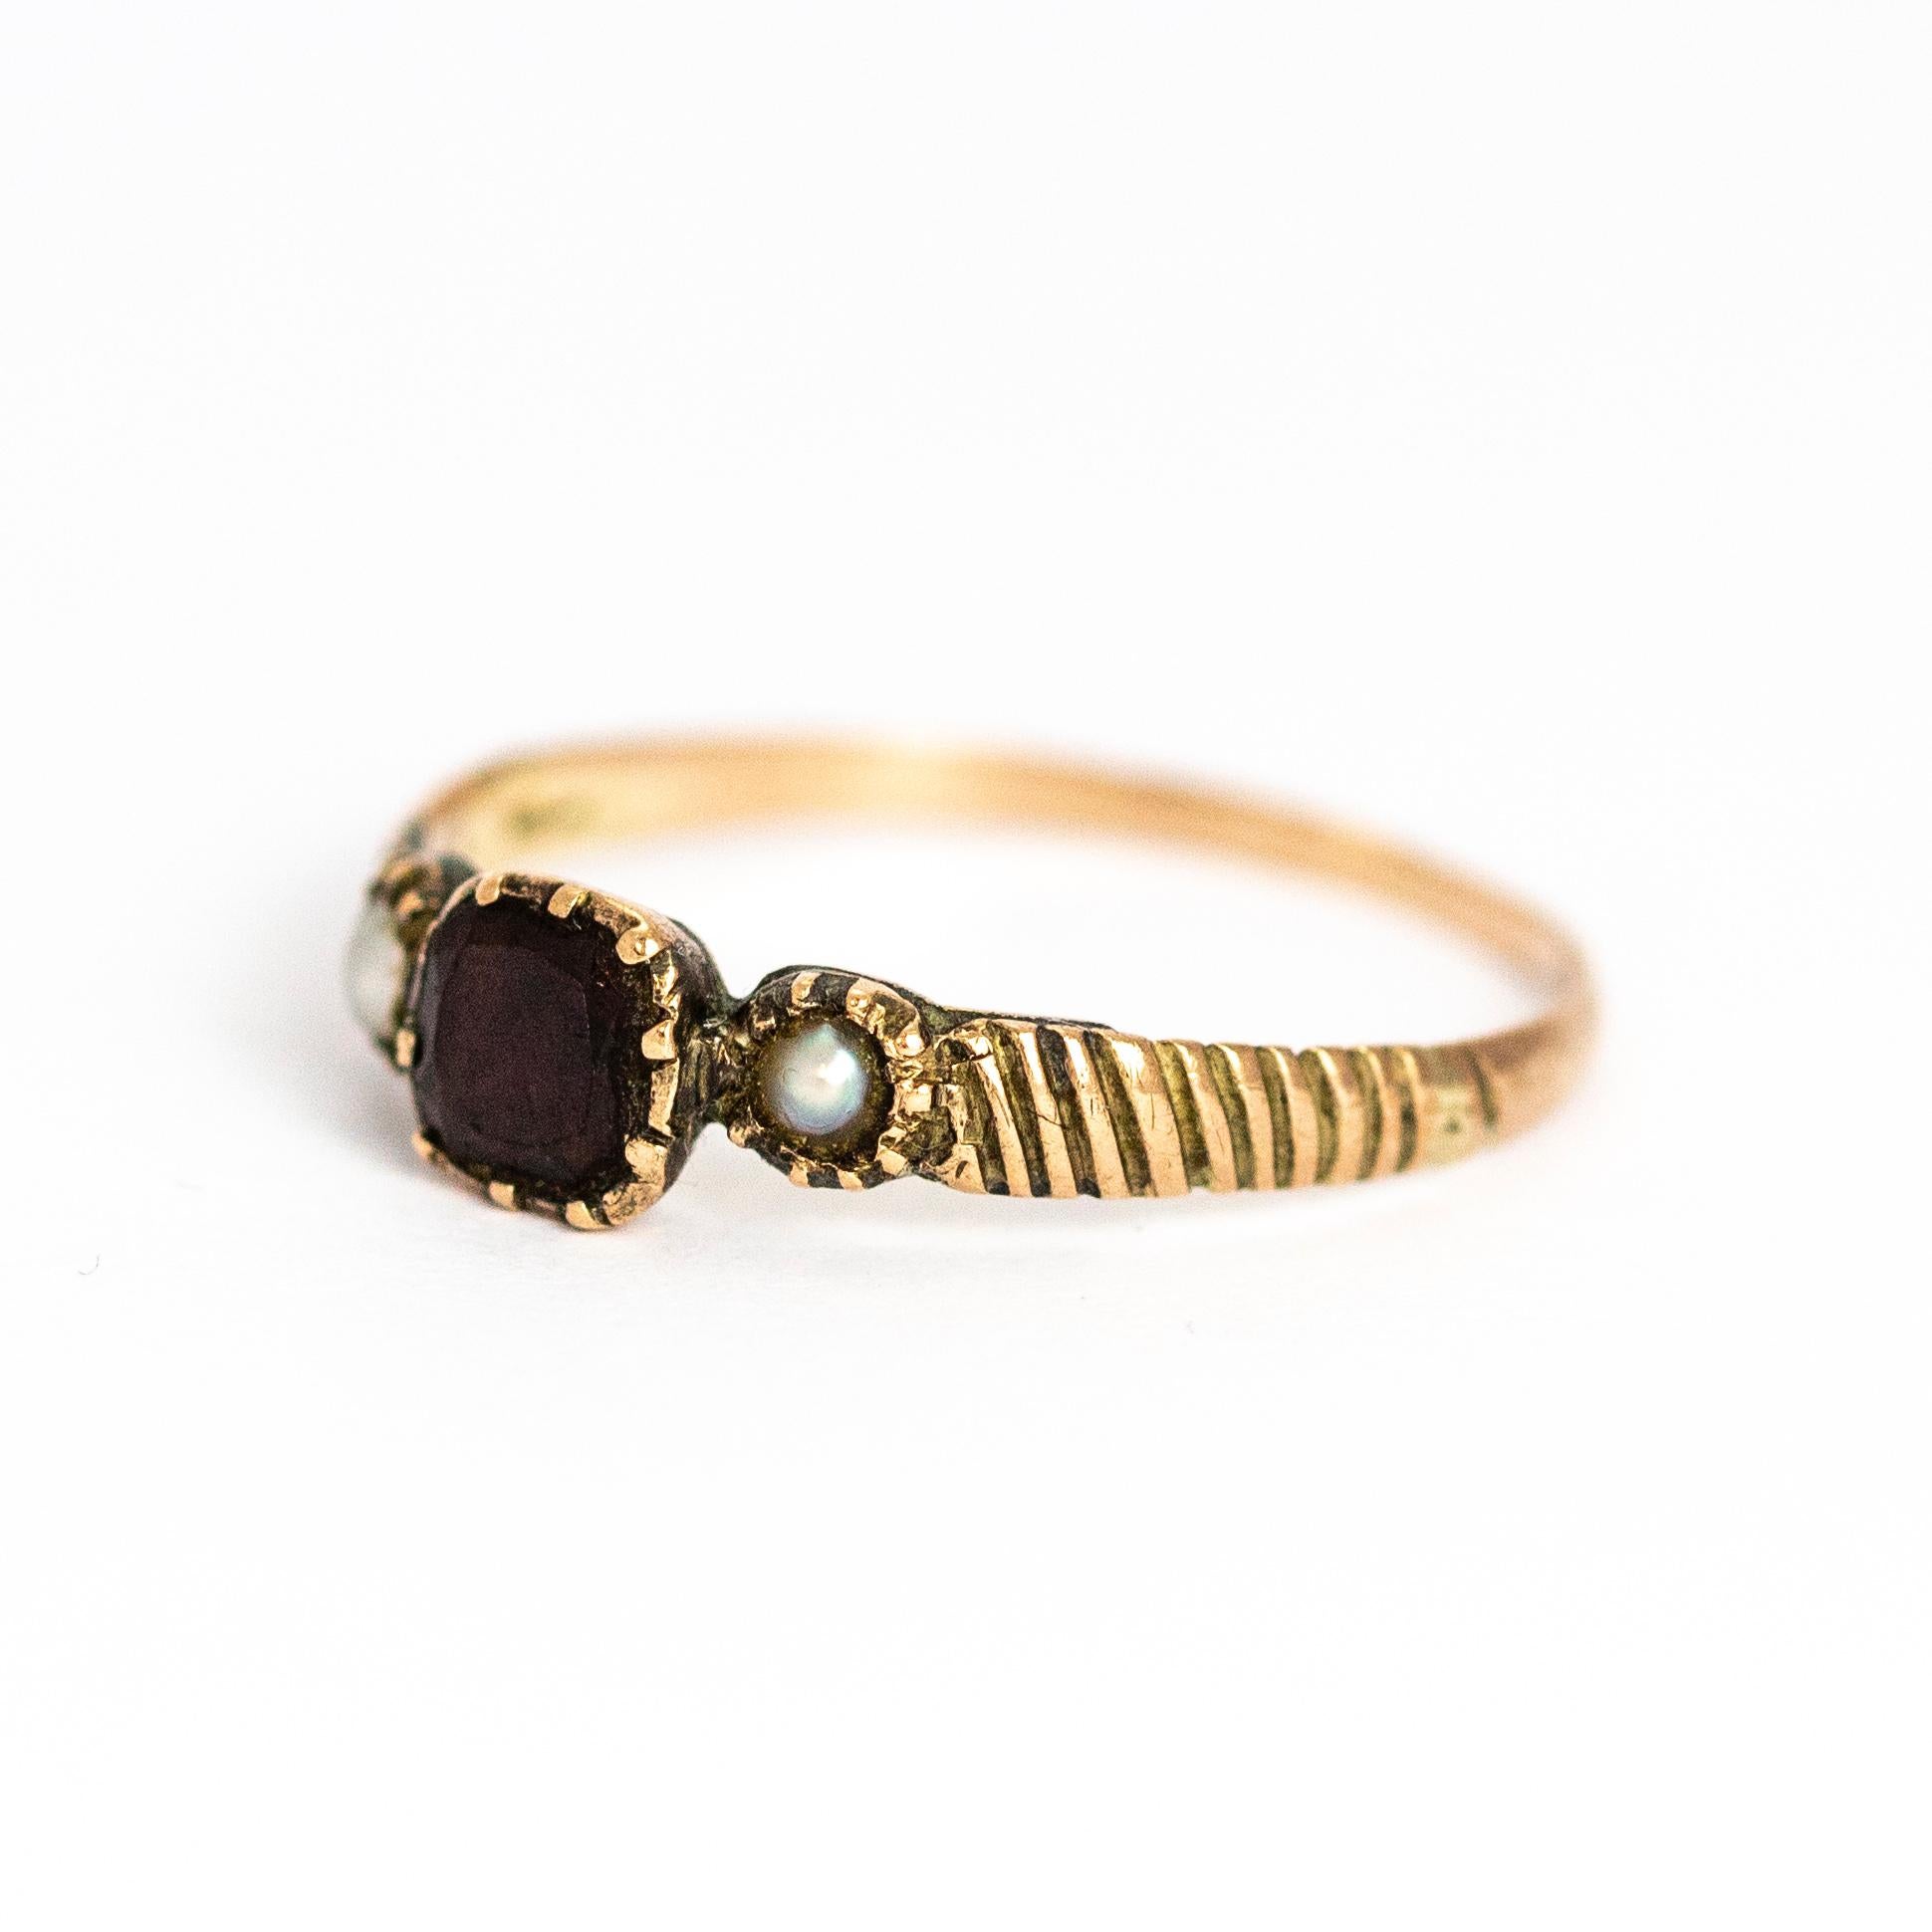 A superb antique Georgian three-stone ring. Centrally set with a beautiful flat-cut garnet flanked by fine seed pearls and hand-chased textured shoulders. Modelled in 9 karat yellow gold.

Ring Size: UK N, US 7